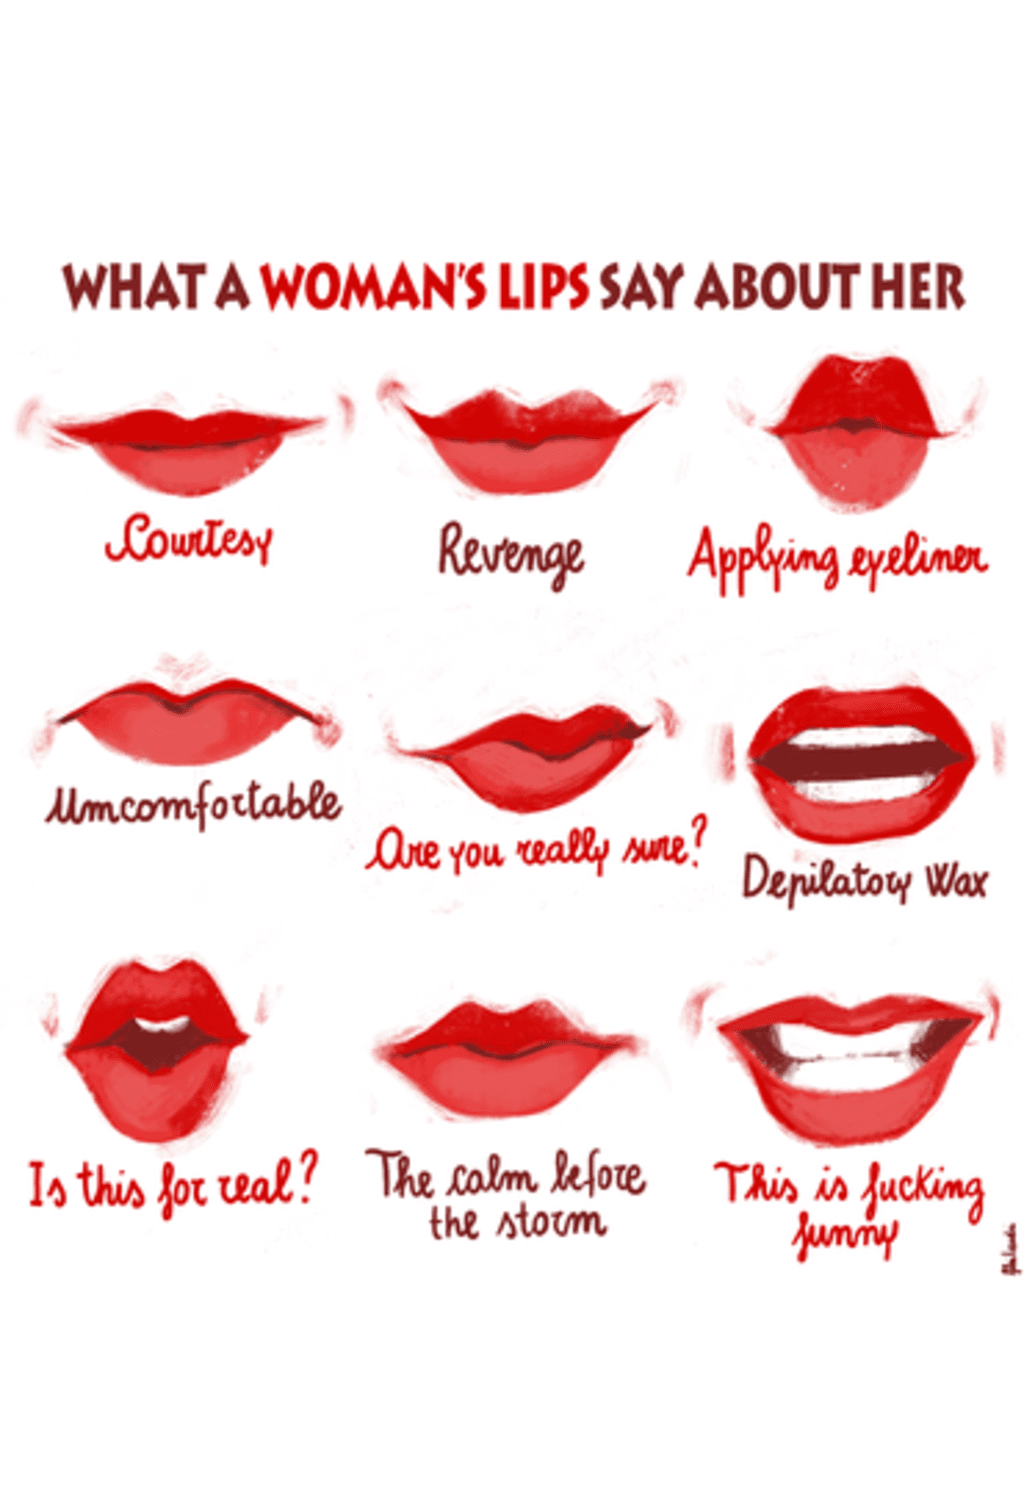 WHAT A WOMAN’S LIPS SAY ABOUT HER